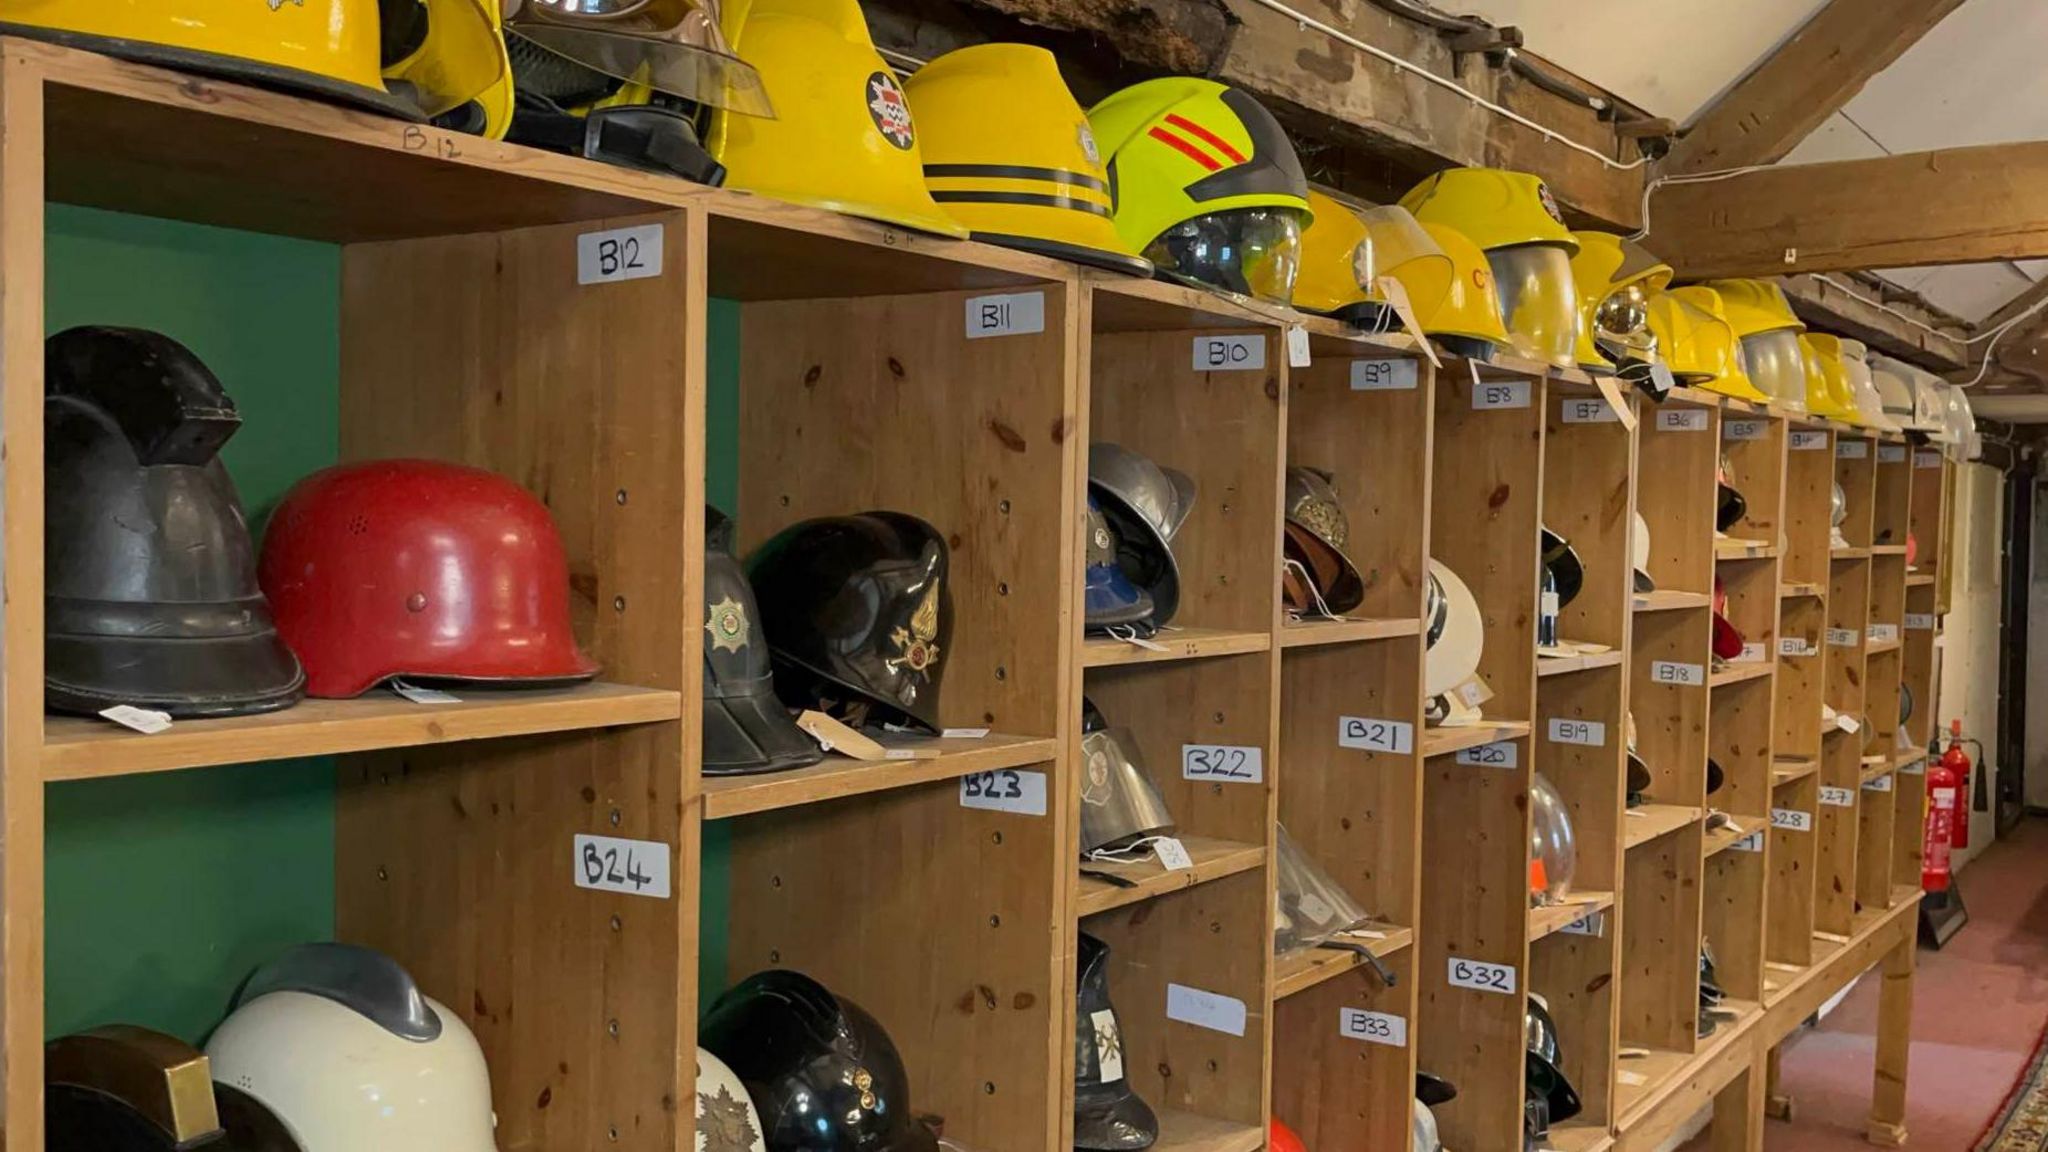 Jack Field's collection of fire helmets